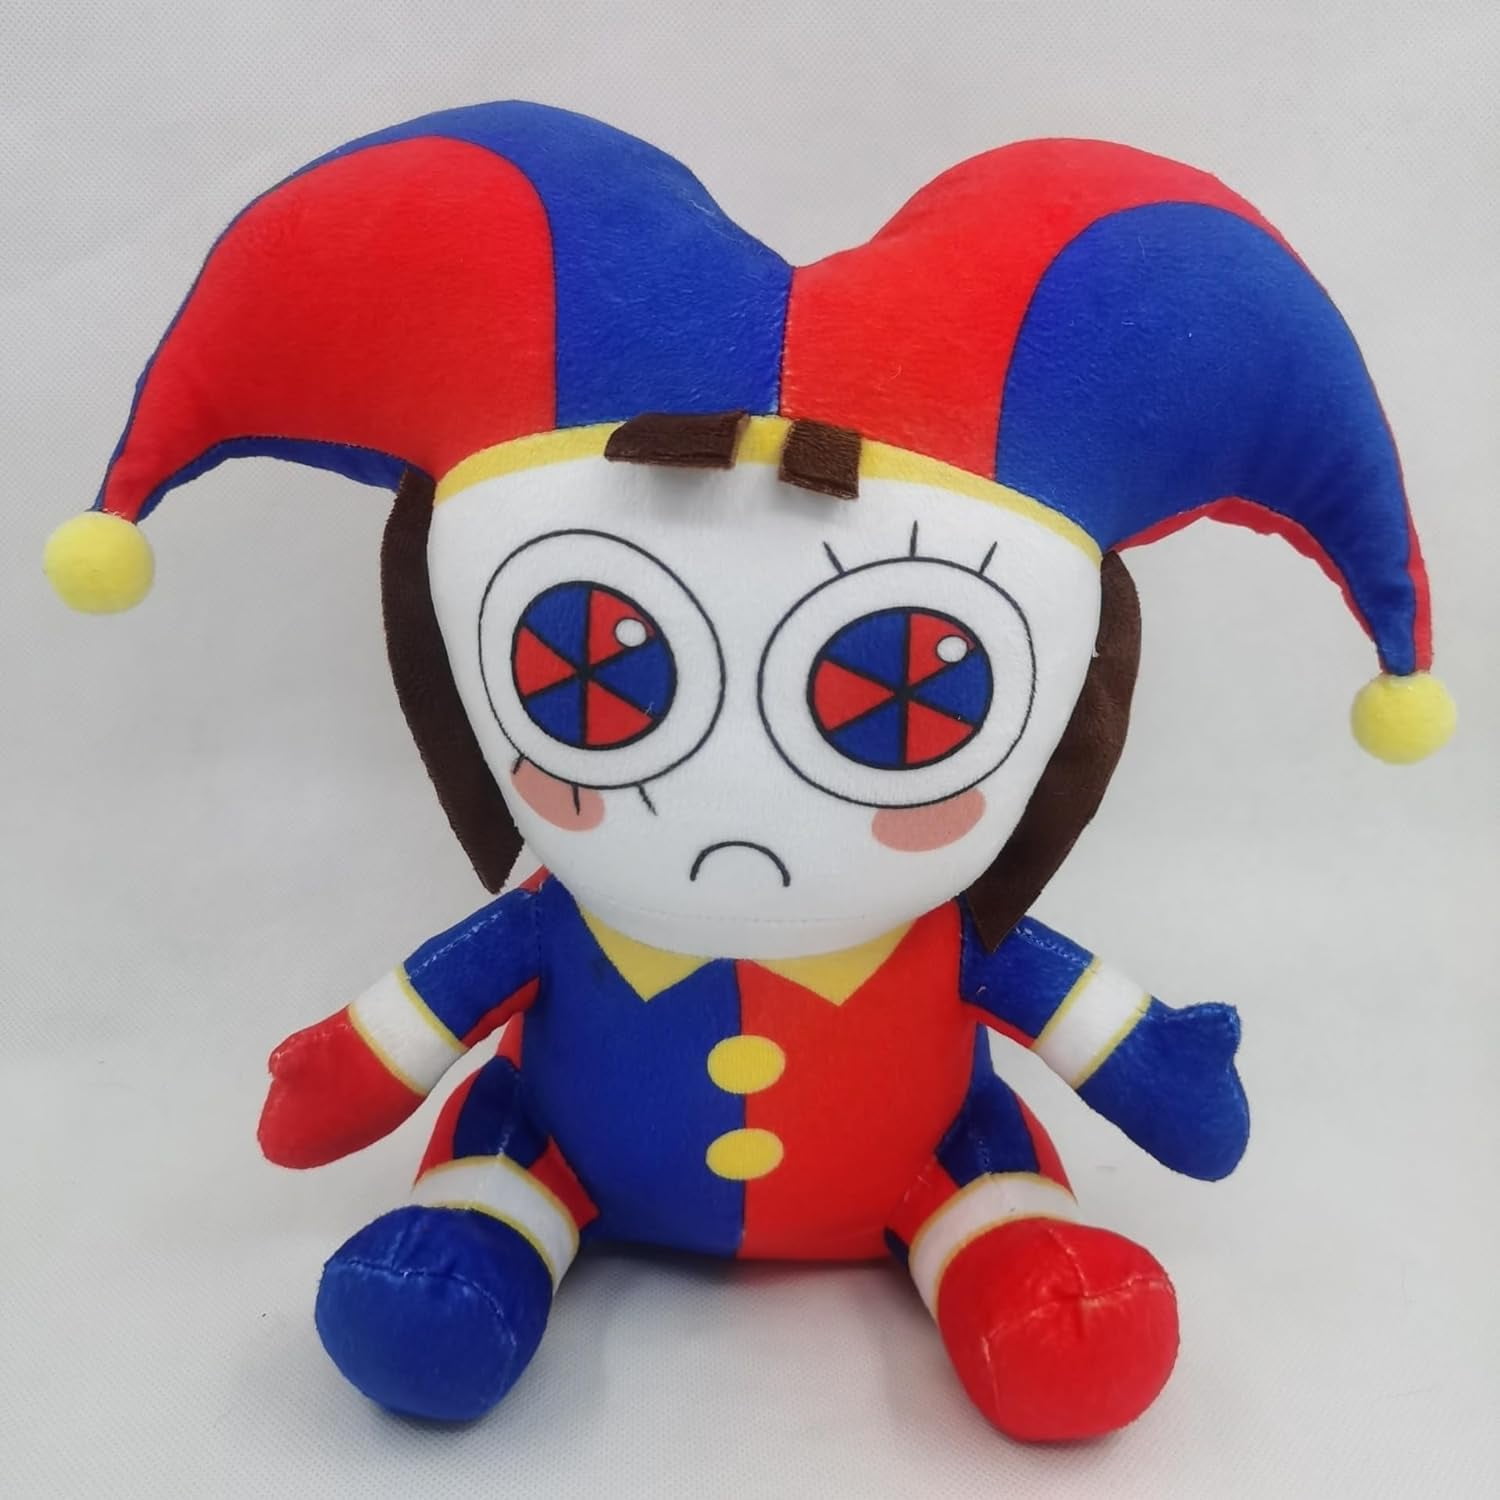  TQJOUJOU 2023 New Digital Circus Plush, The Amazing Pomni and  Jax Plushies Toy, New Digital Circus Stuffed Toys, Cartoon Image Pillow for  Fans and Kids (B) : Toys & Games